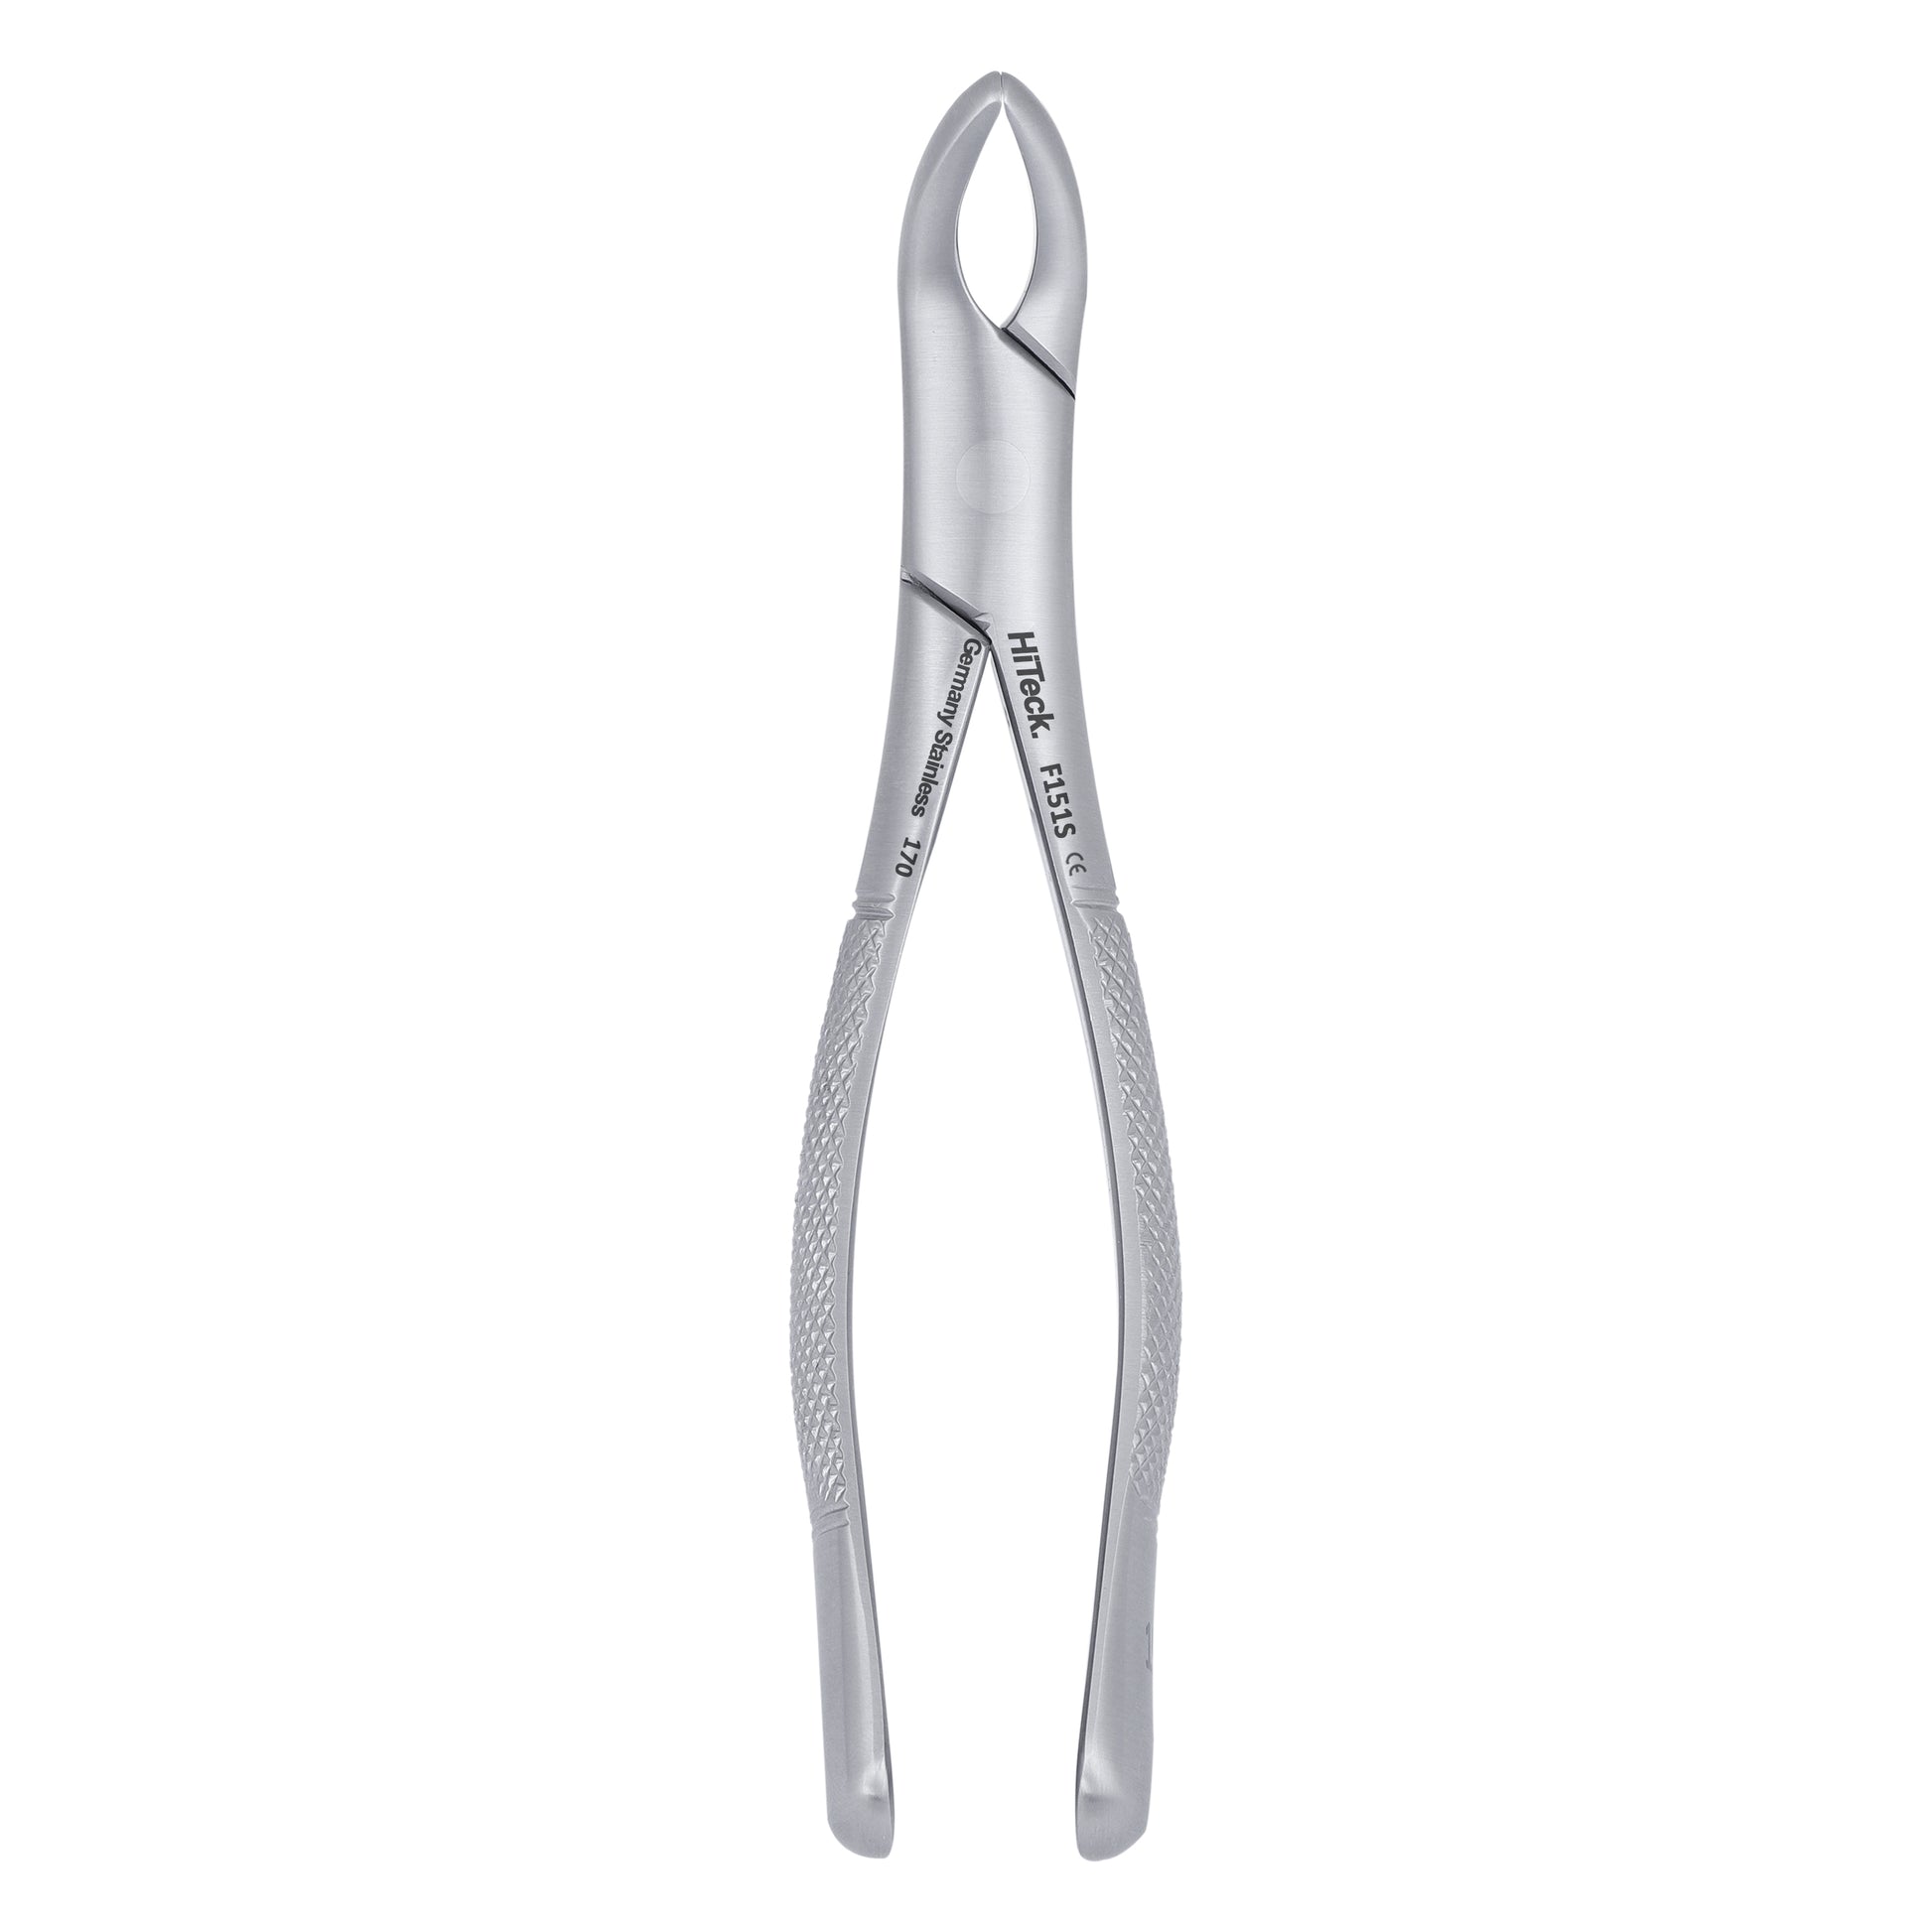 151S Pedo Lower Primary Teeth & roots Universal Extraction Forcep - HiTeck Medical Instruments